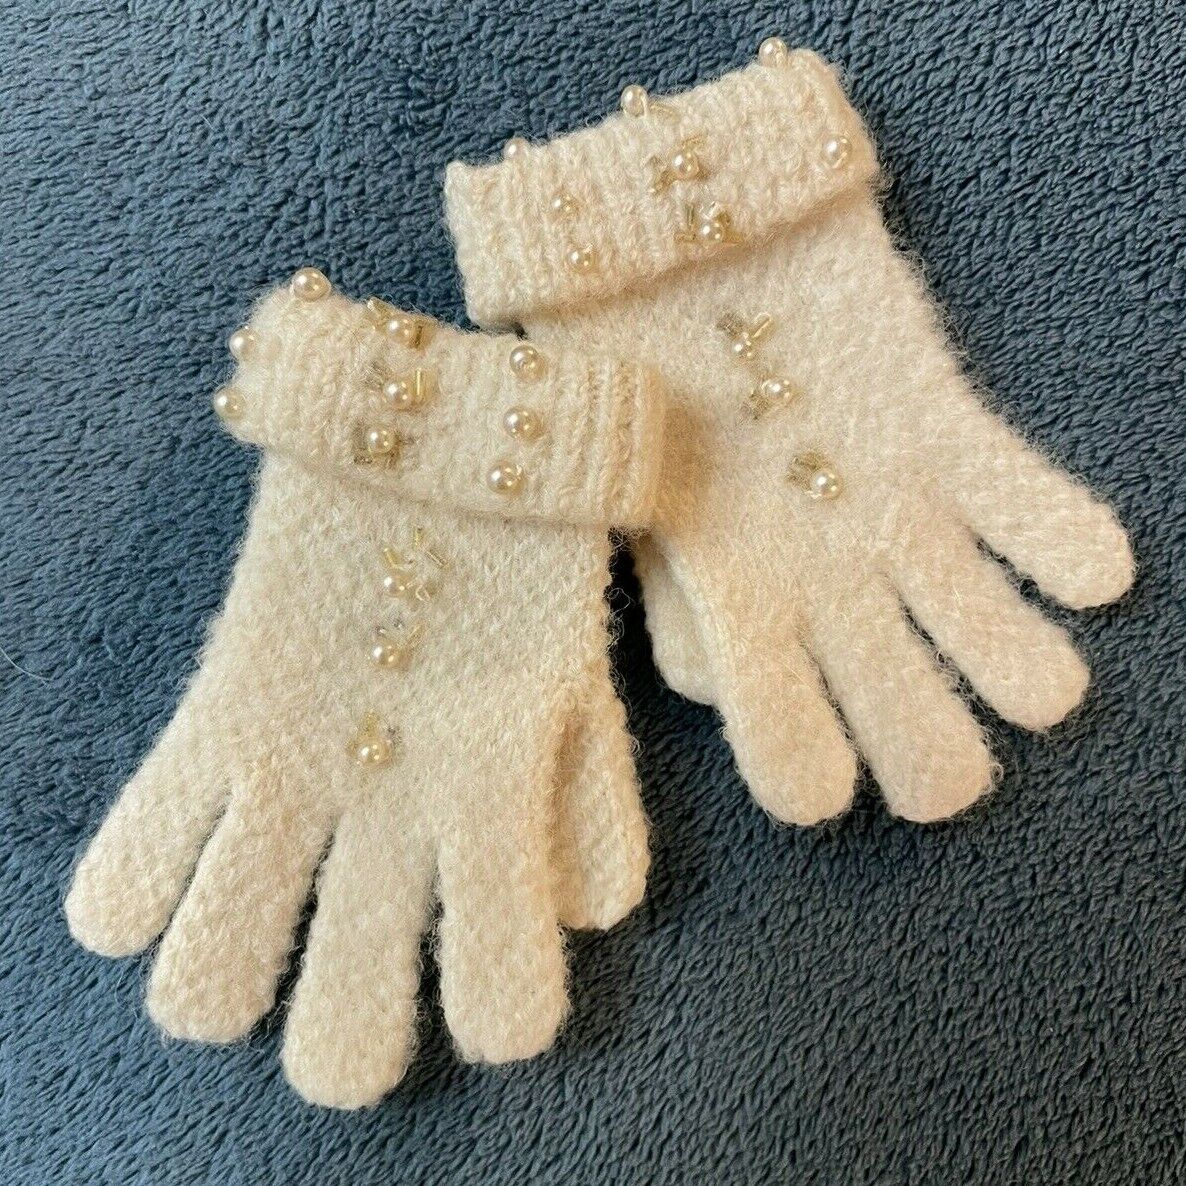 Exquisite Antique Ivory Knitted Beaded Baby Gloves